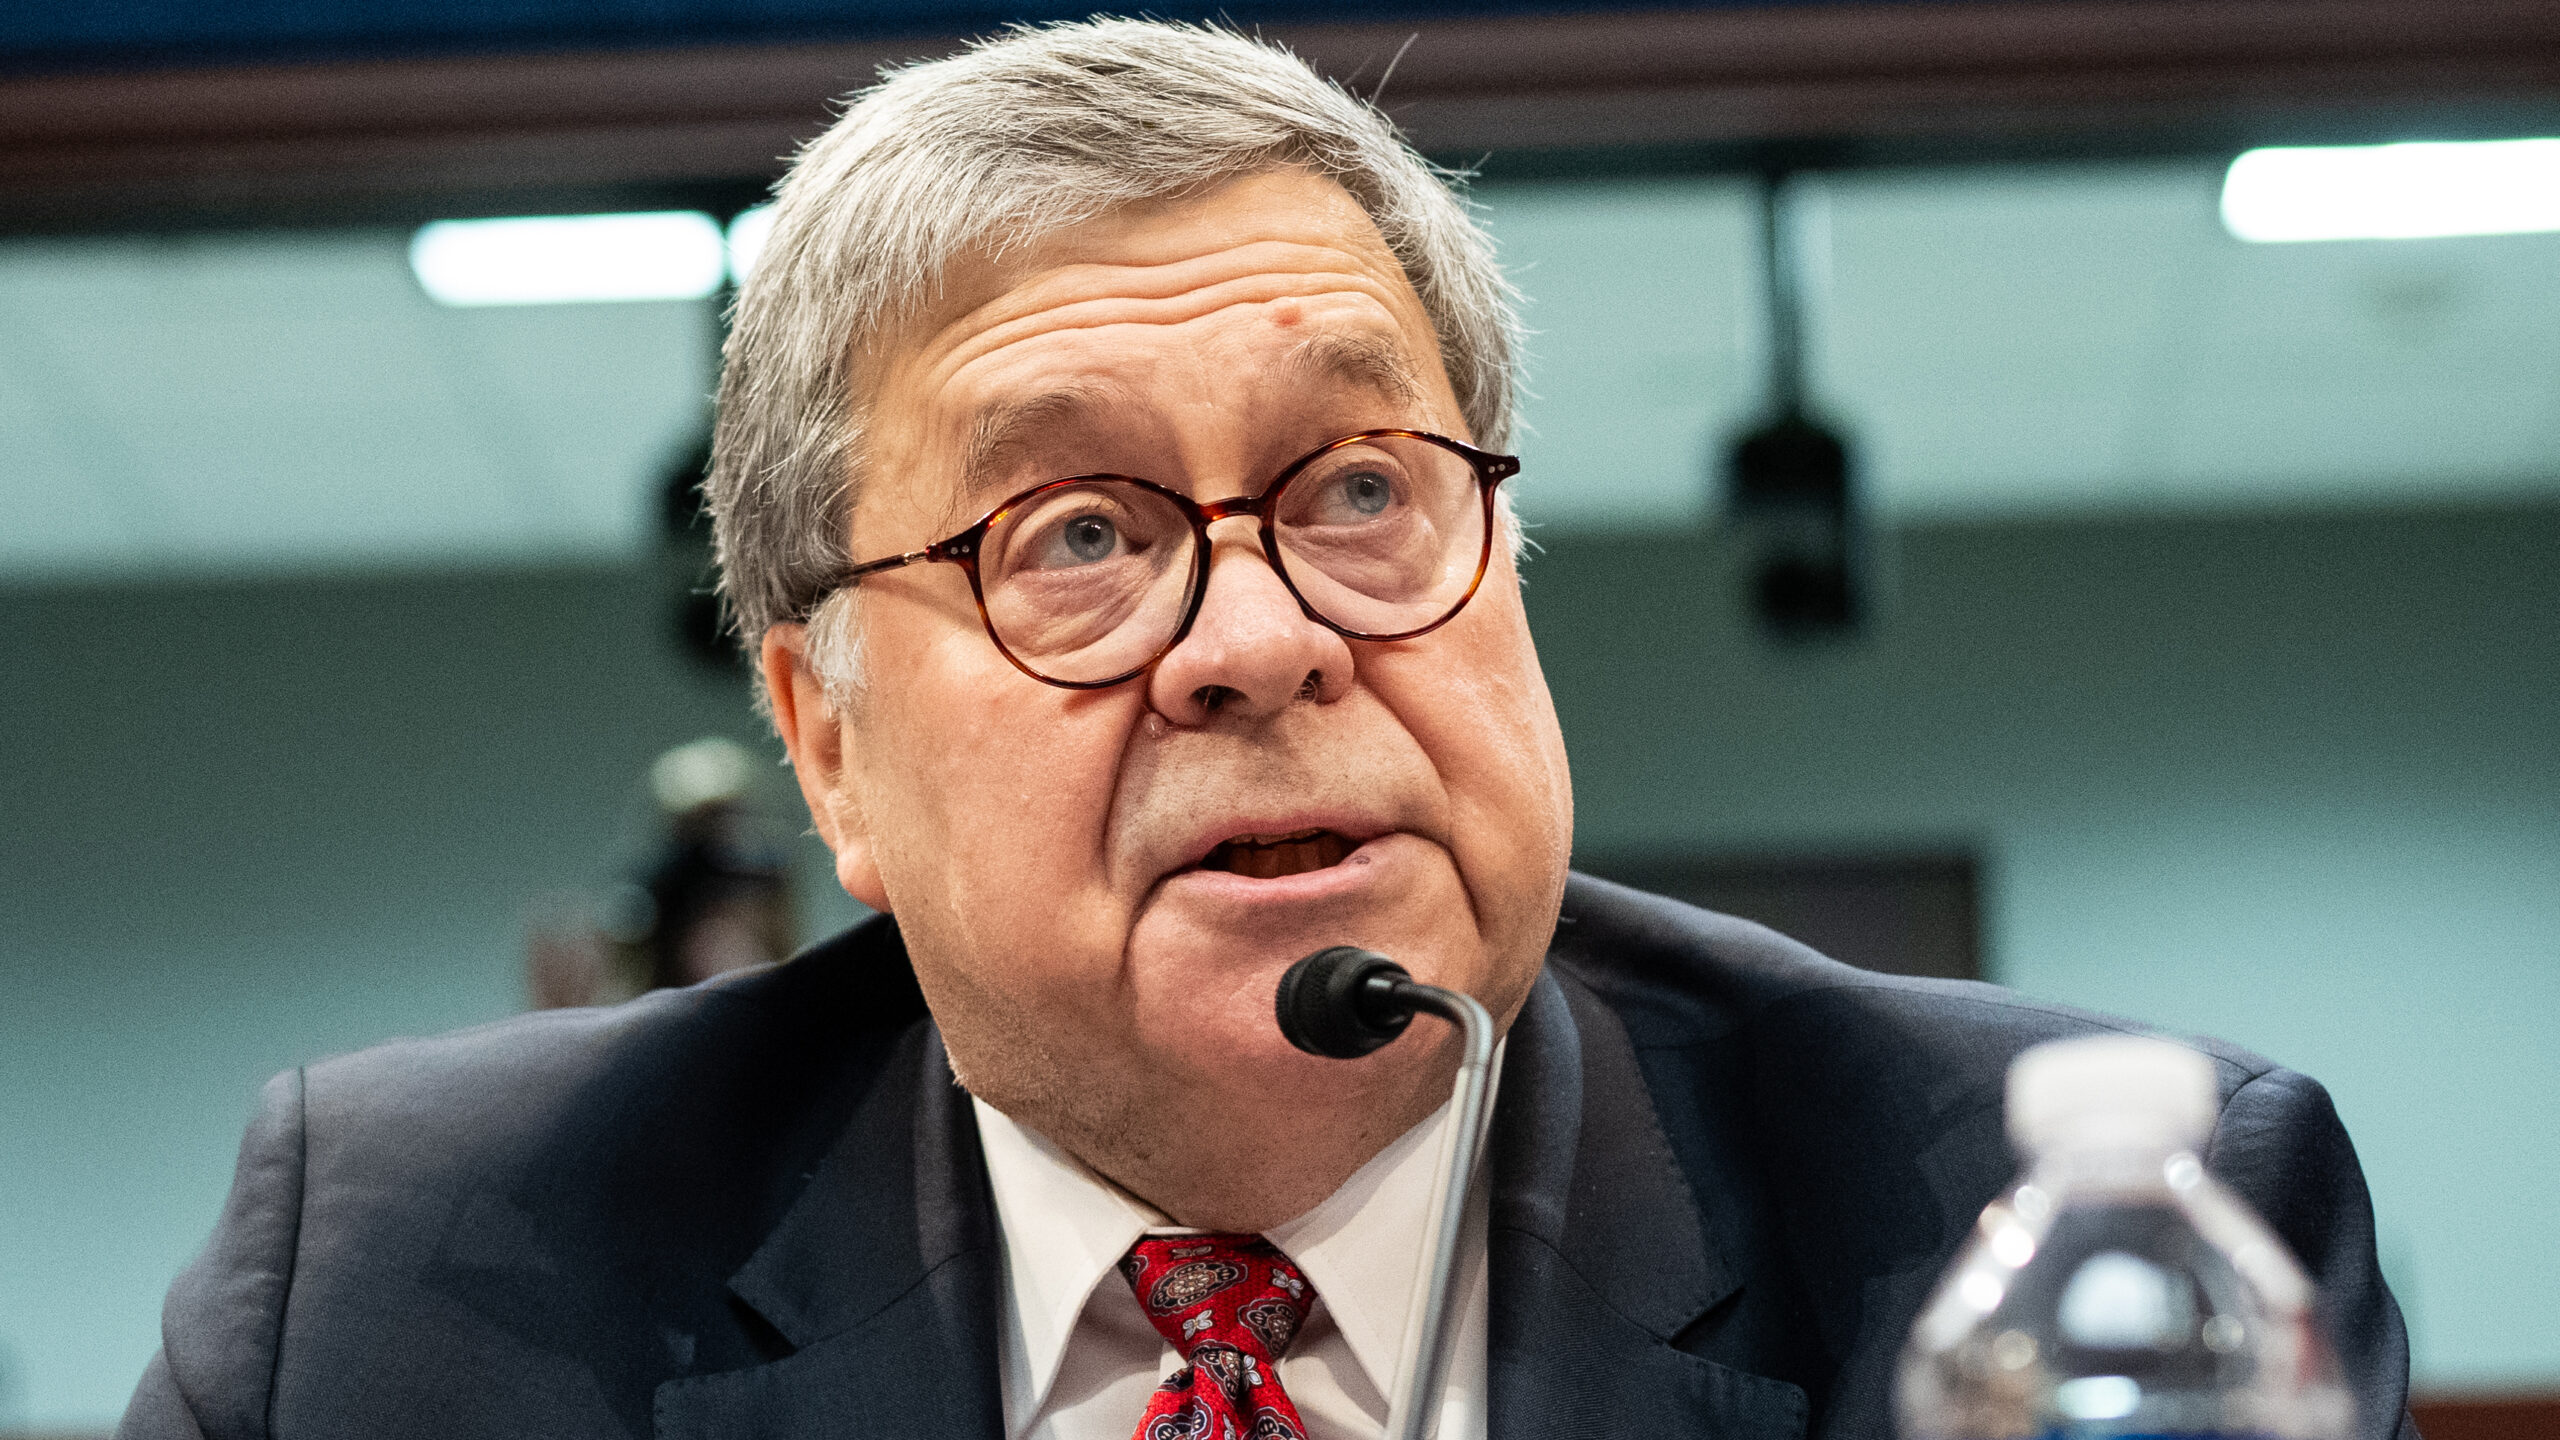 Bill Barr criticizes China for ‘mass slaughter’ in U.S. due to Fentanyl